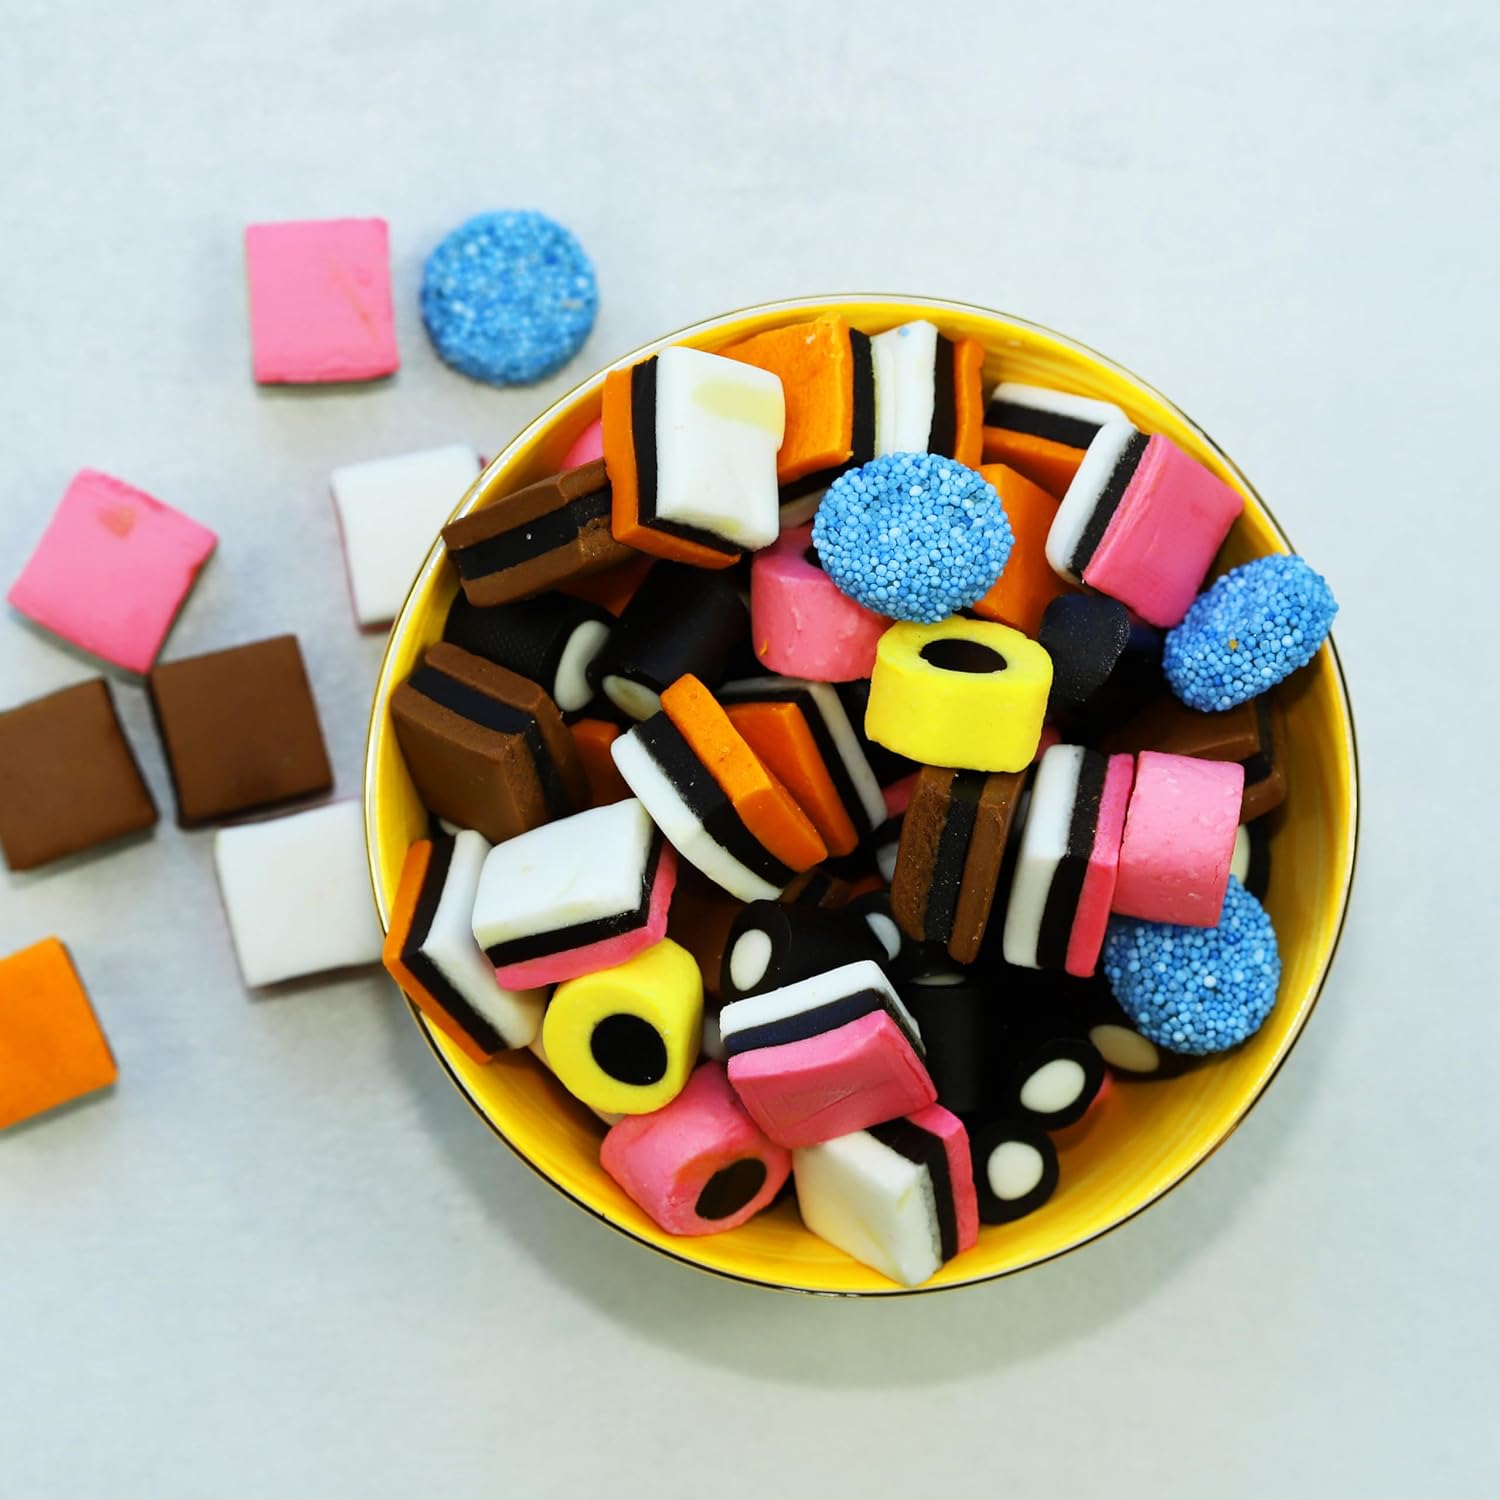 Yupik Licorice Allsorts With Natural Flavors, Classic Candy, 2.2 lb : Grocery & Gourmet Food